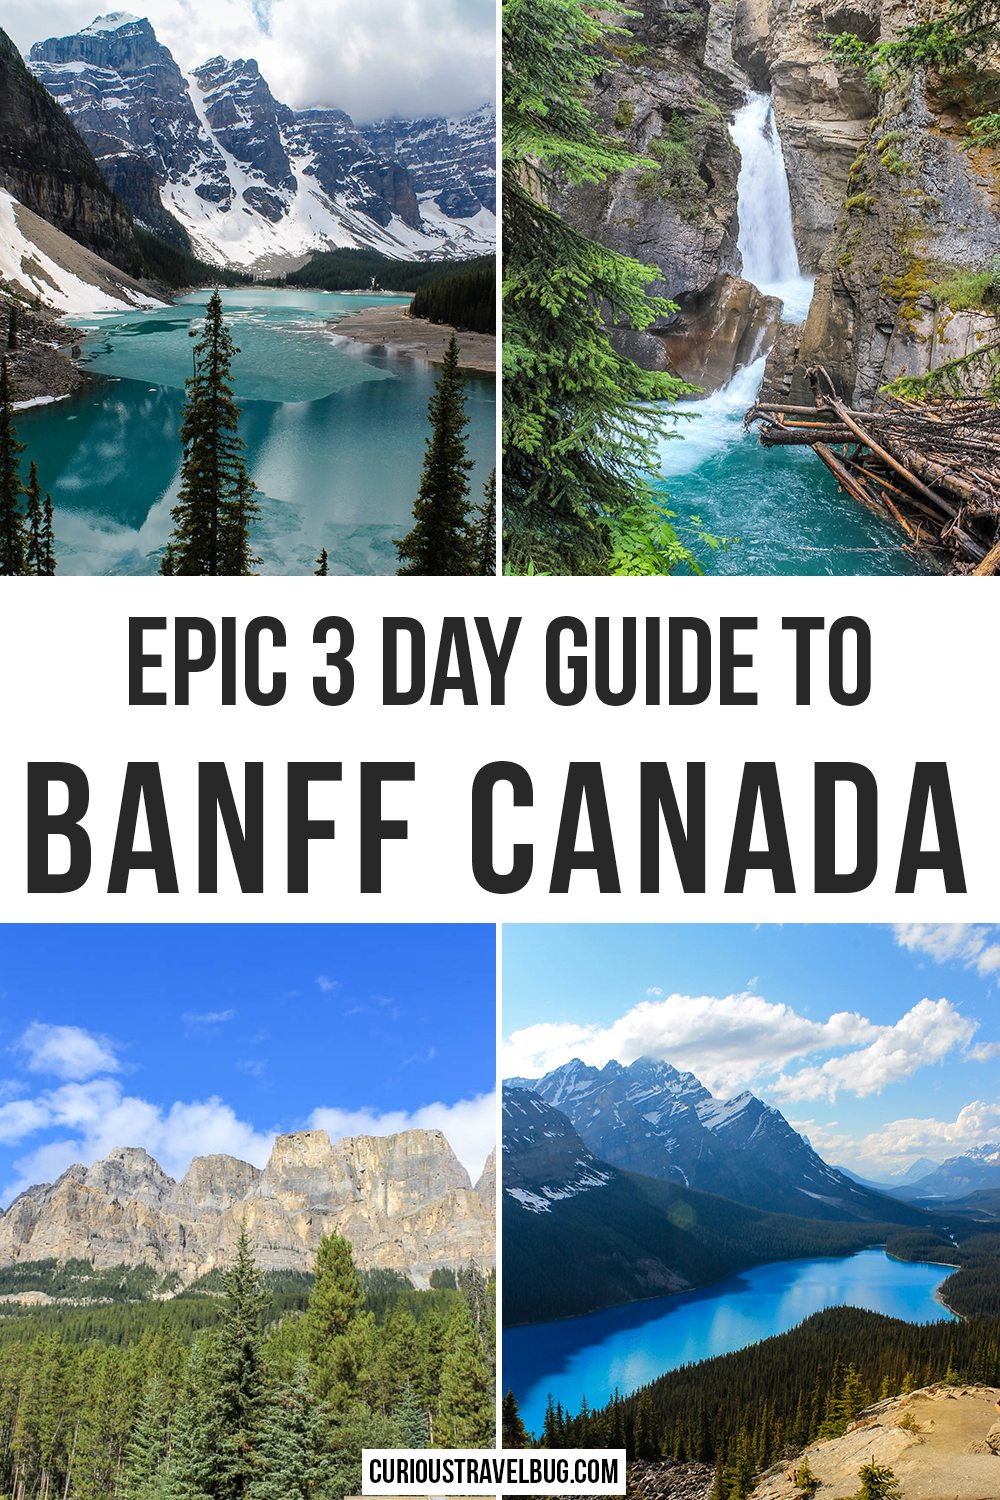 The best itinerary for three days in Banff National Park in Canada. Everything you need to know about where to stay, what to eat, and what to do in Banff including top sights like the lakes of Banff, scenic drives, and easy hikes not to miss.